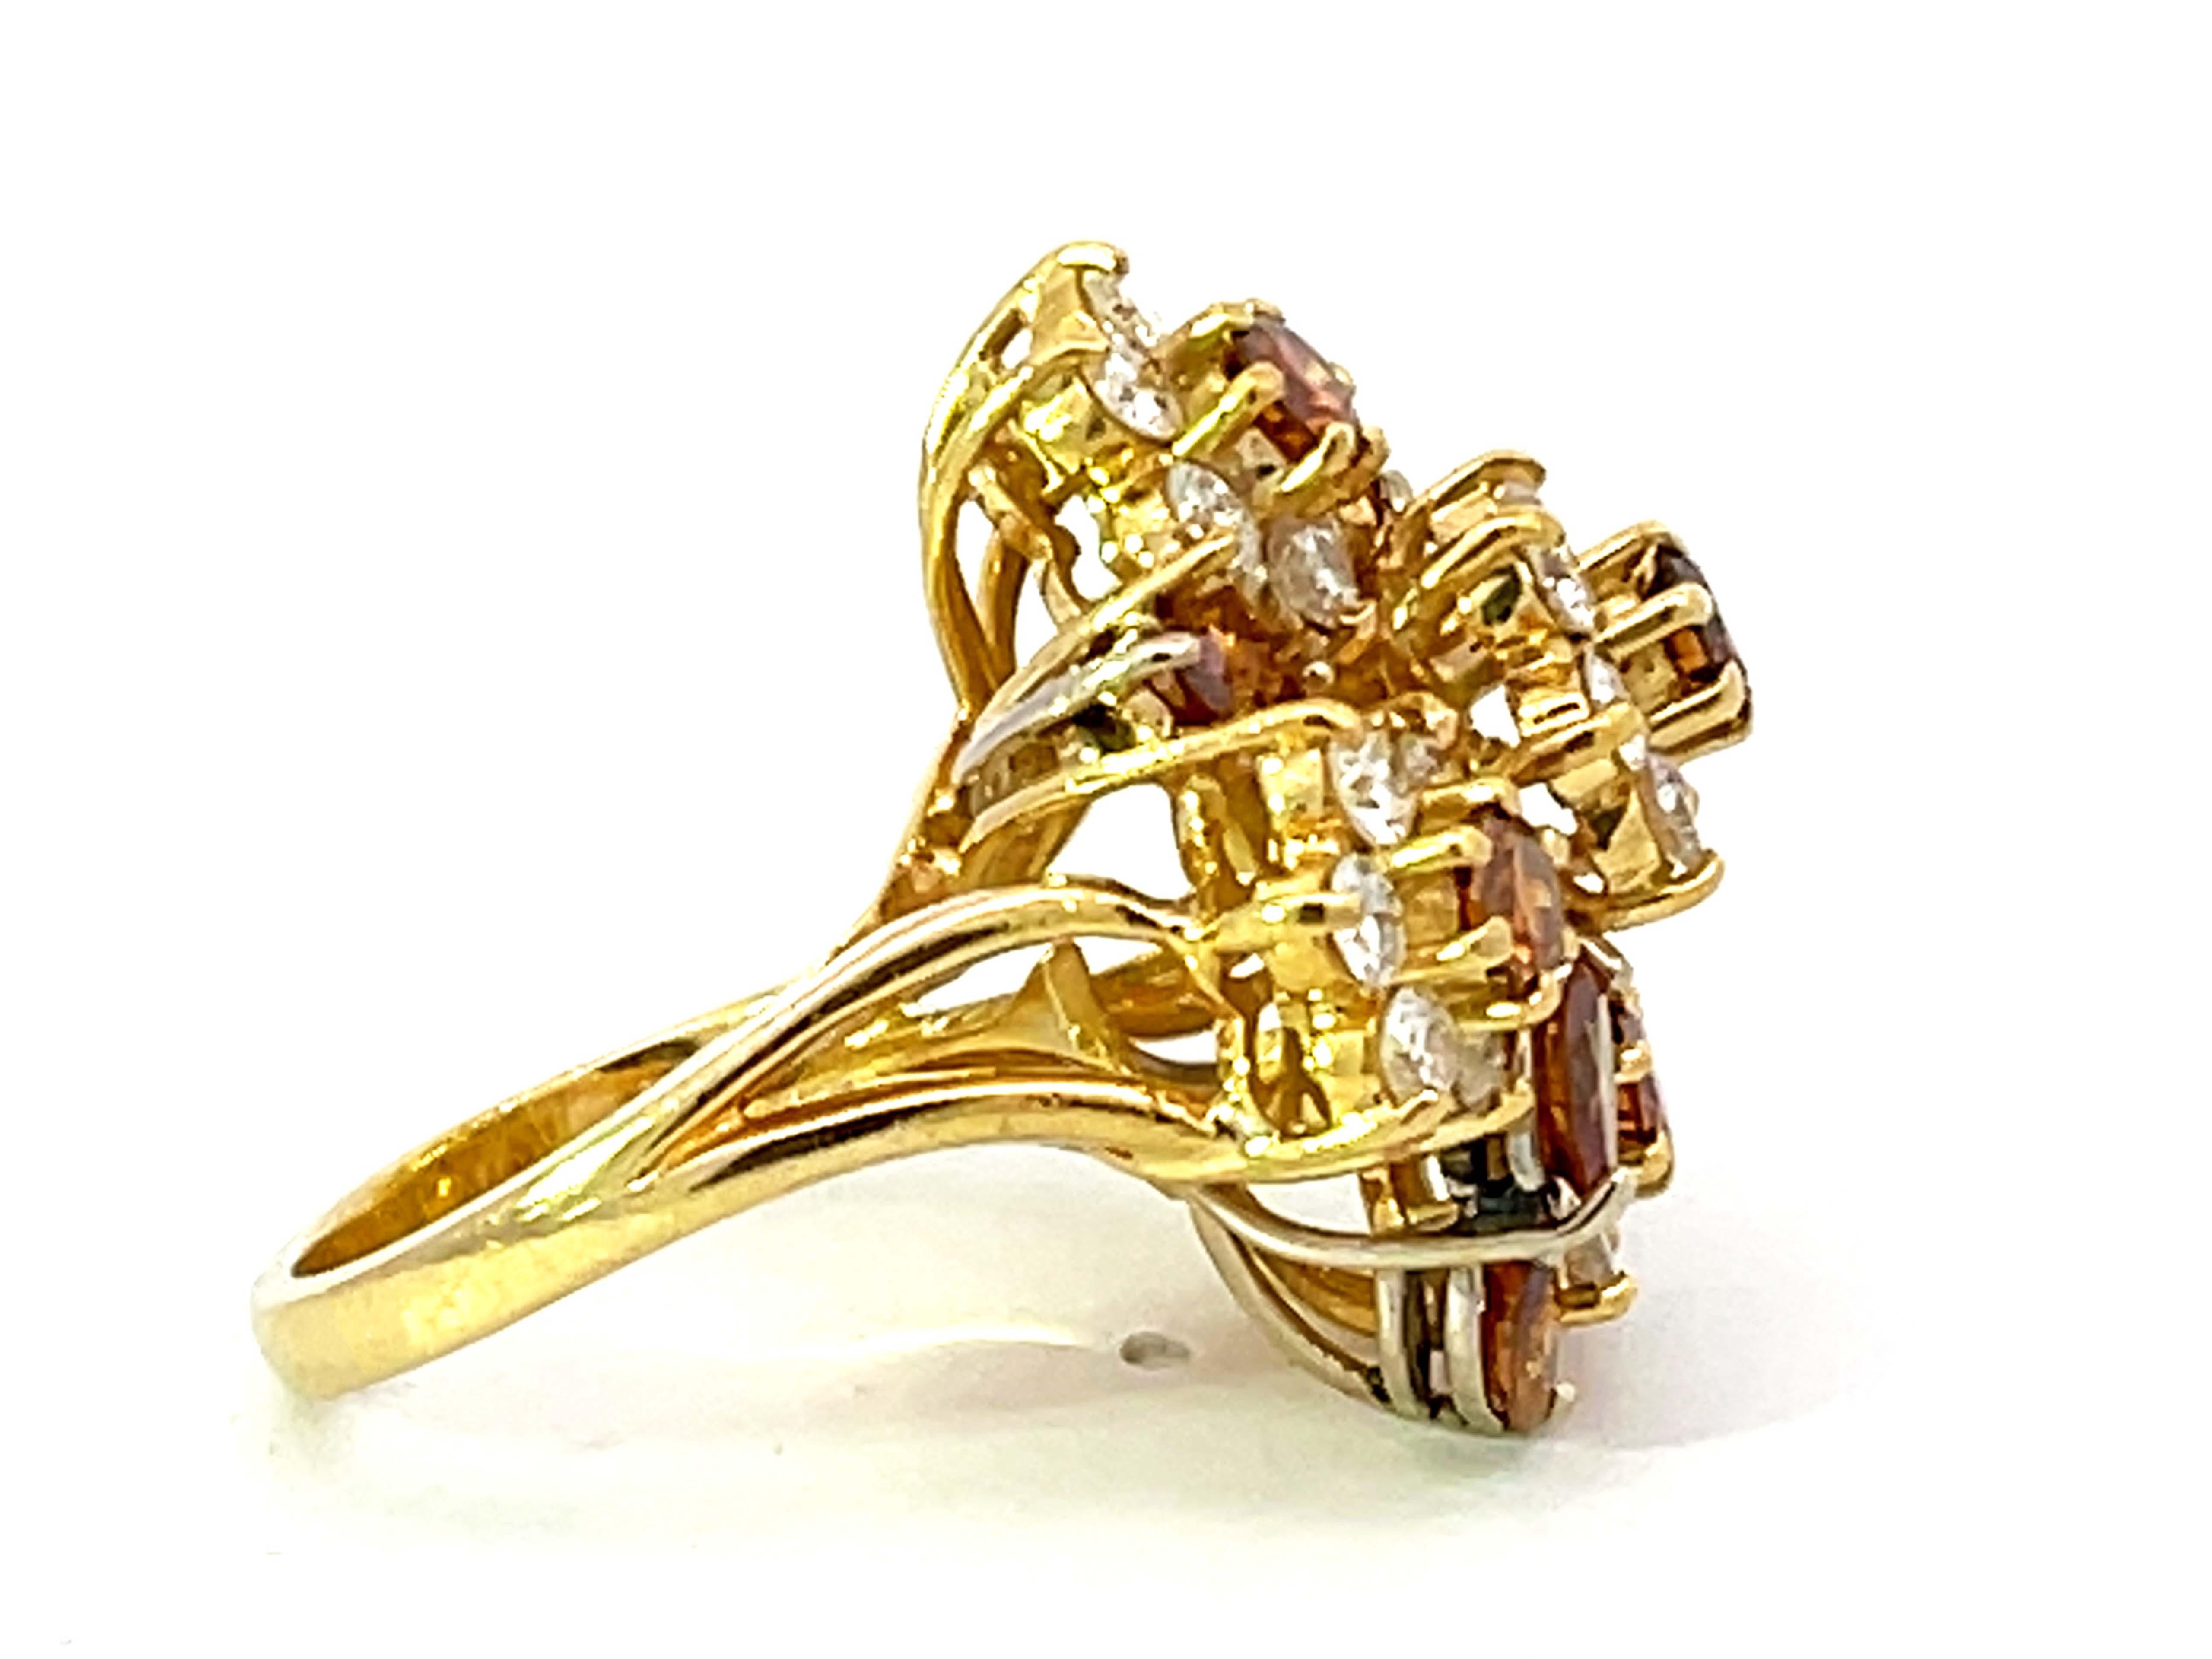 Terrel and Zimmelman Natural Fancy Vivid Diamond Cluster Ring in 18K Yellow Gold In Excellent Condition For Sale In Honolulu, HI